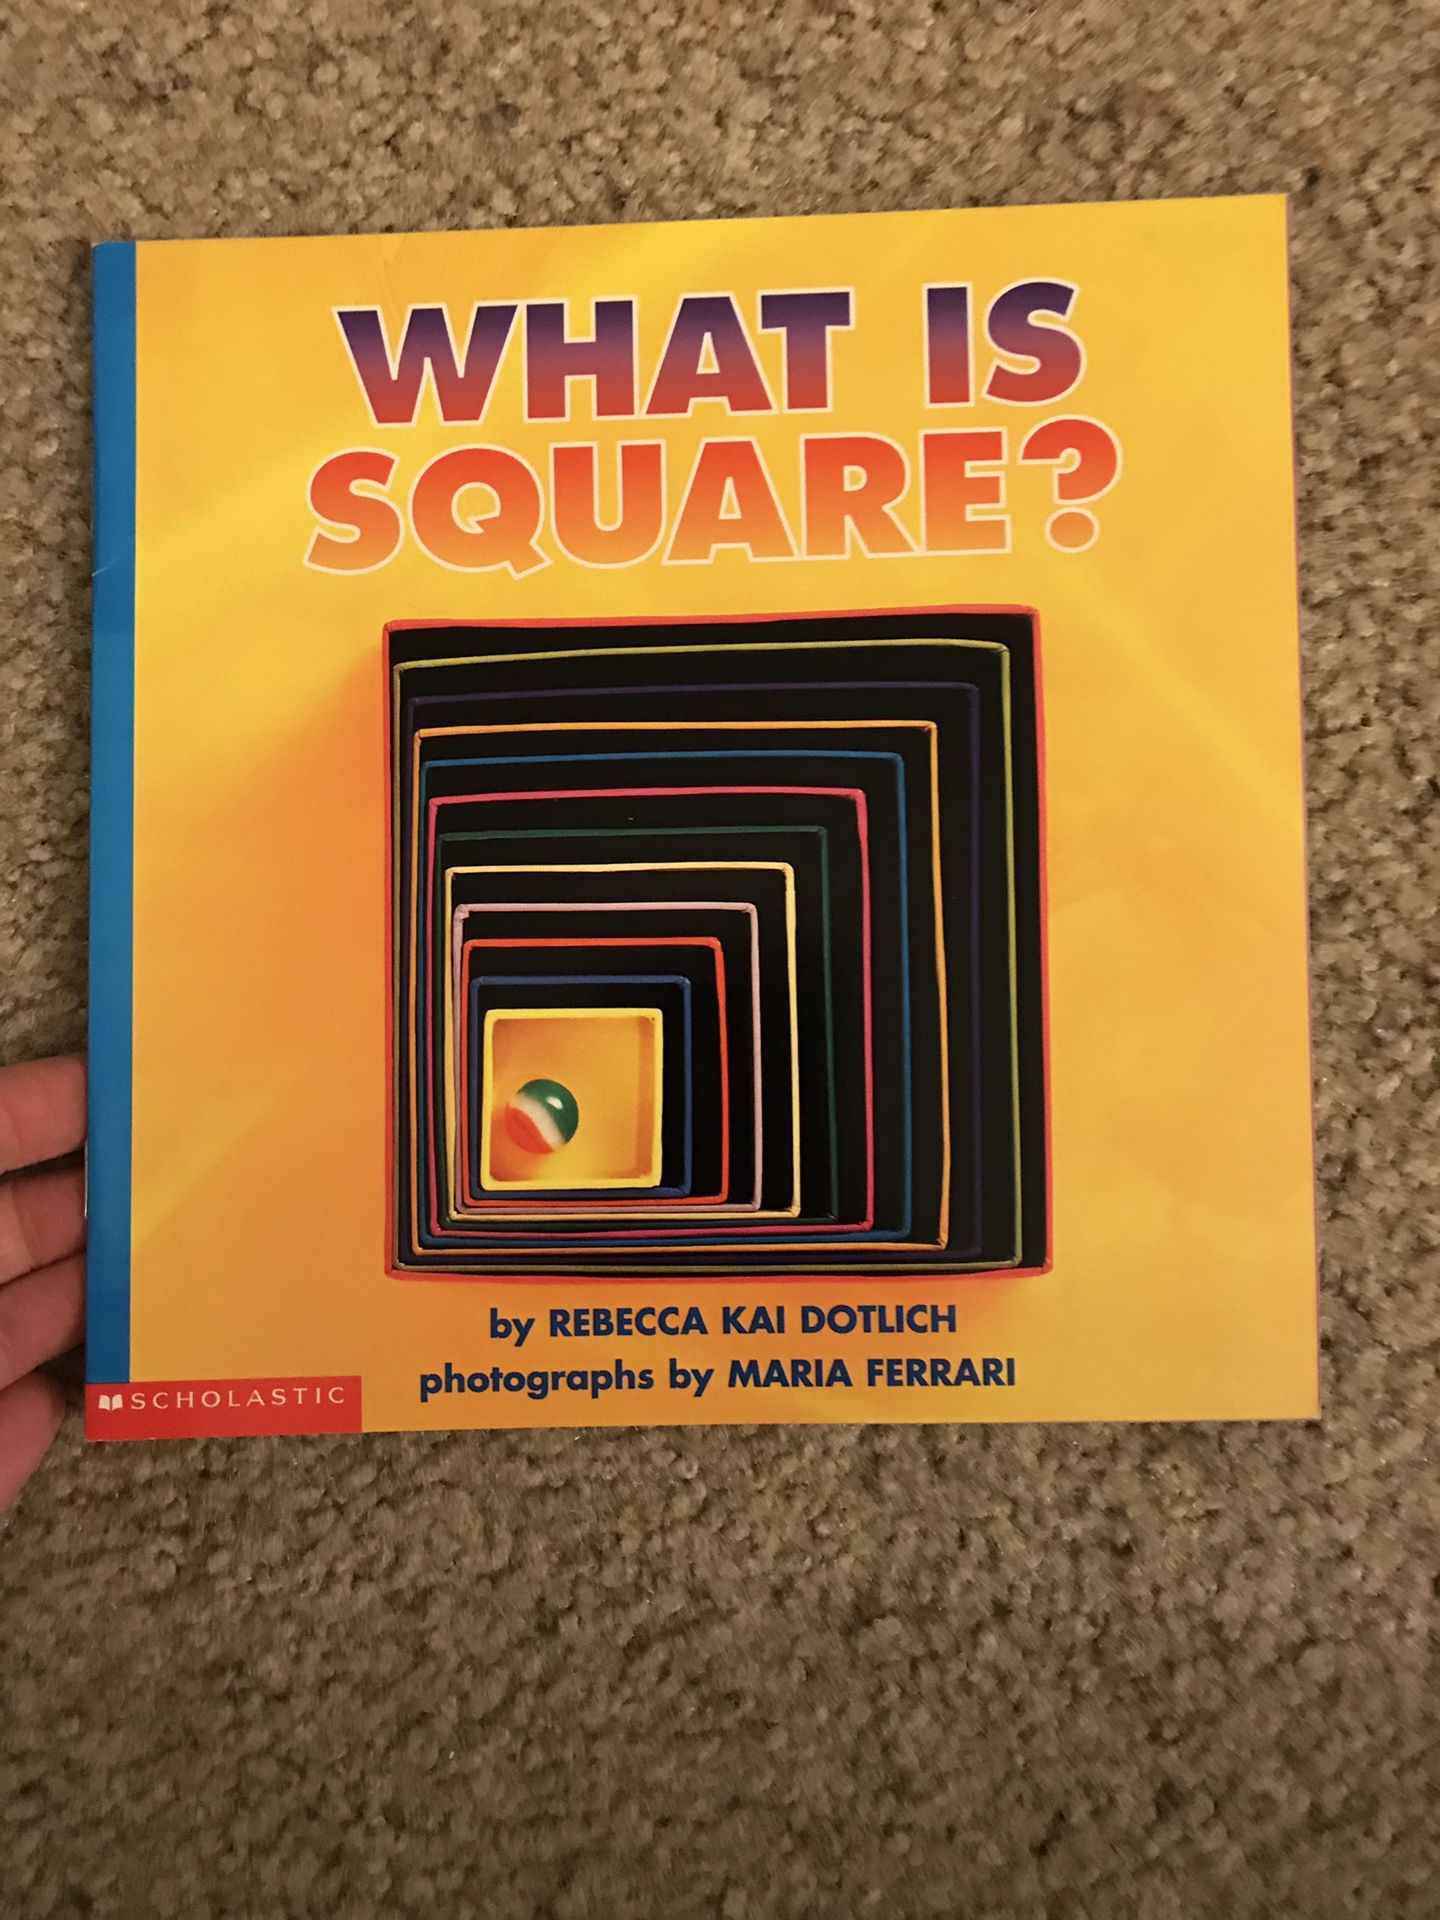 What is a square